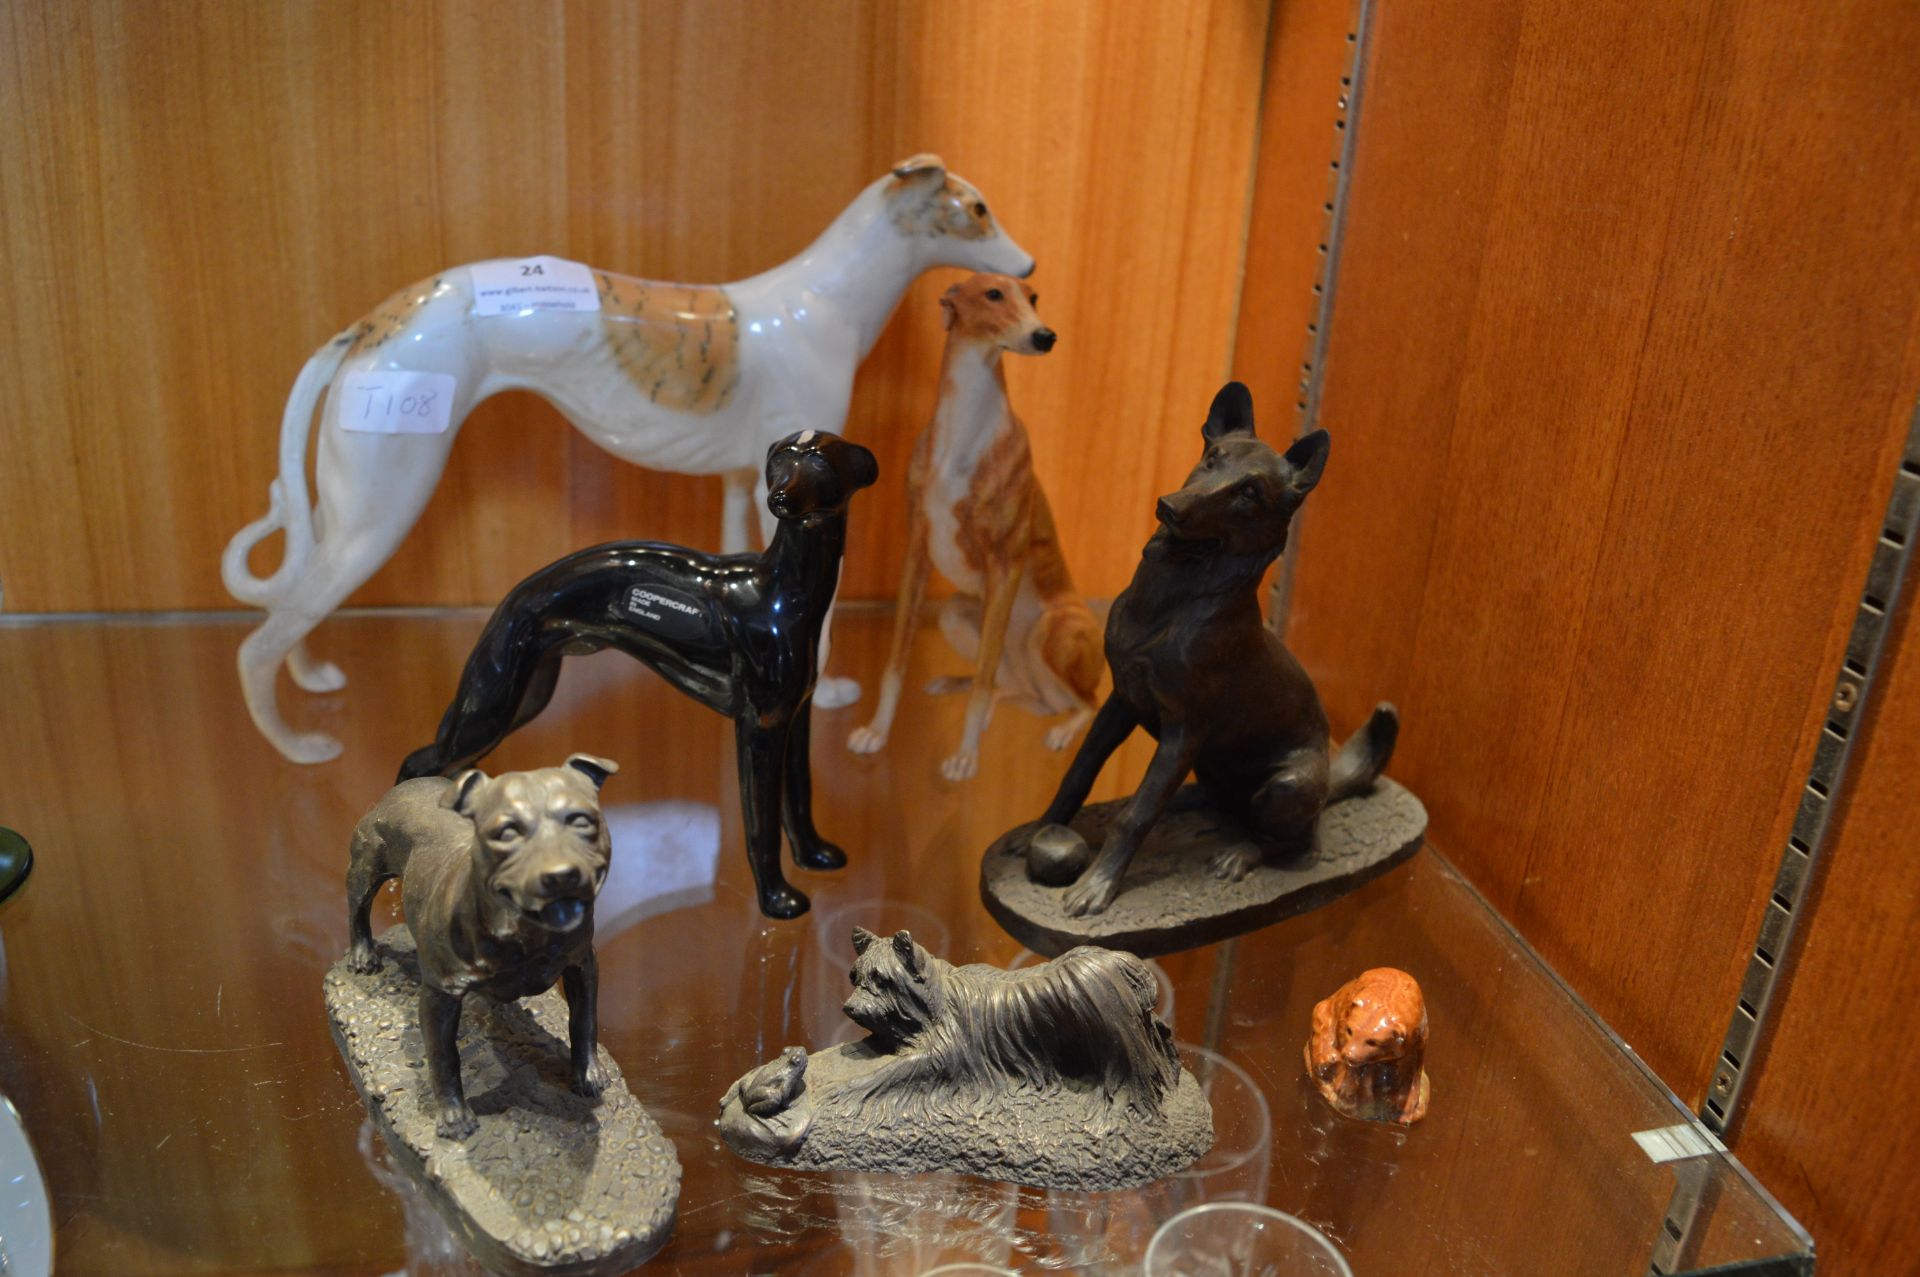 Collection of Six Ornamental Greyhounds and Other